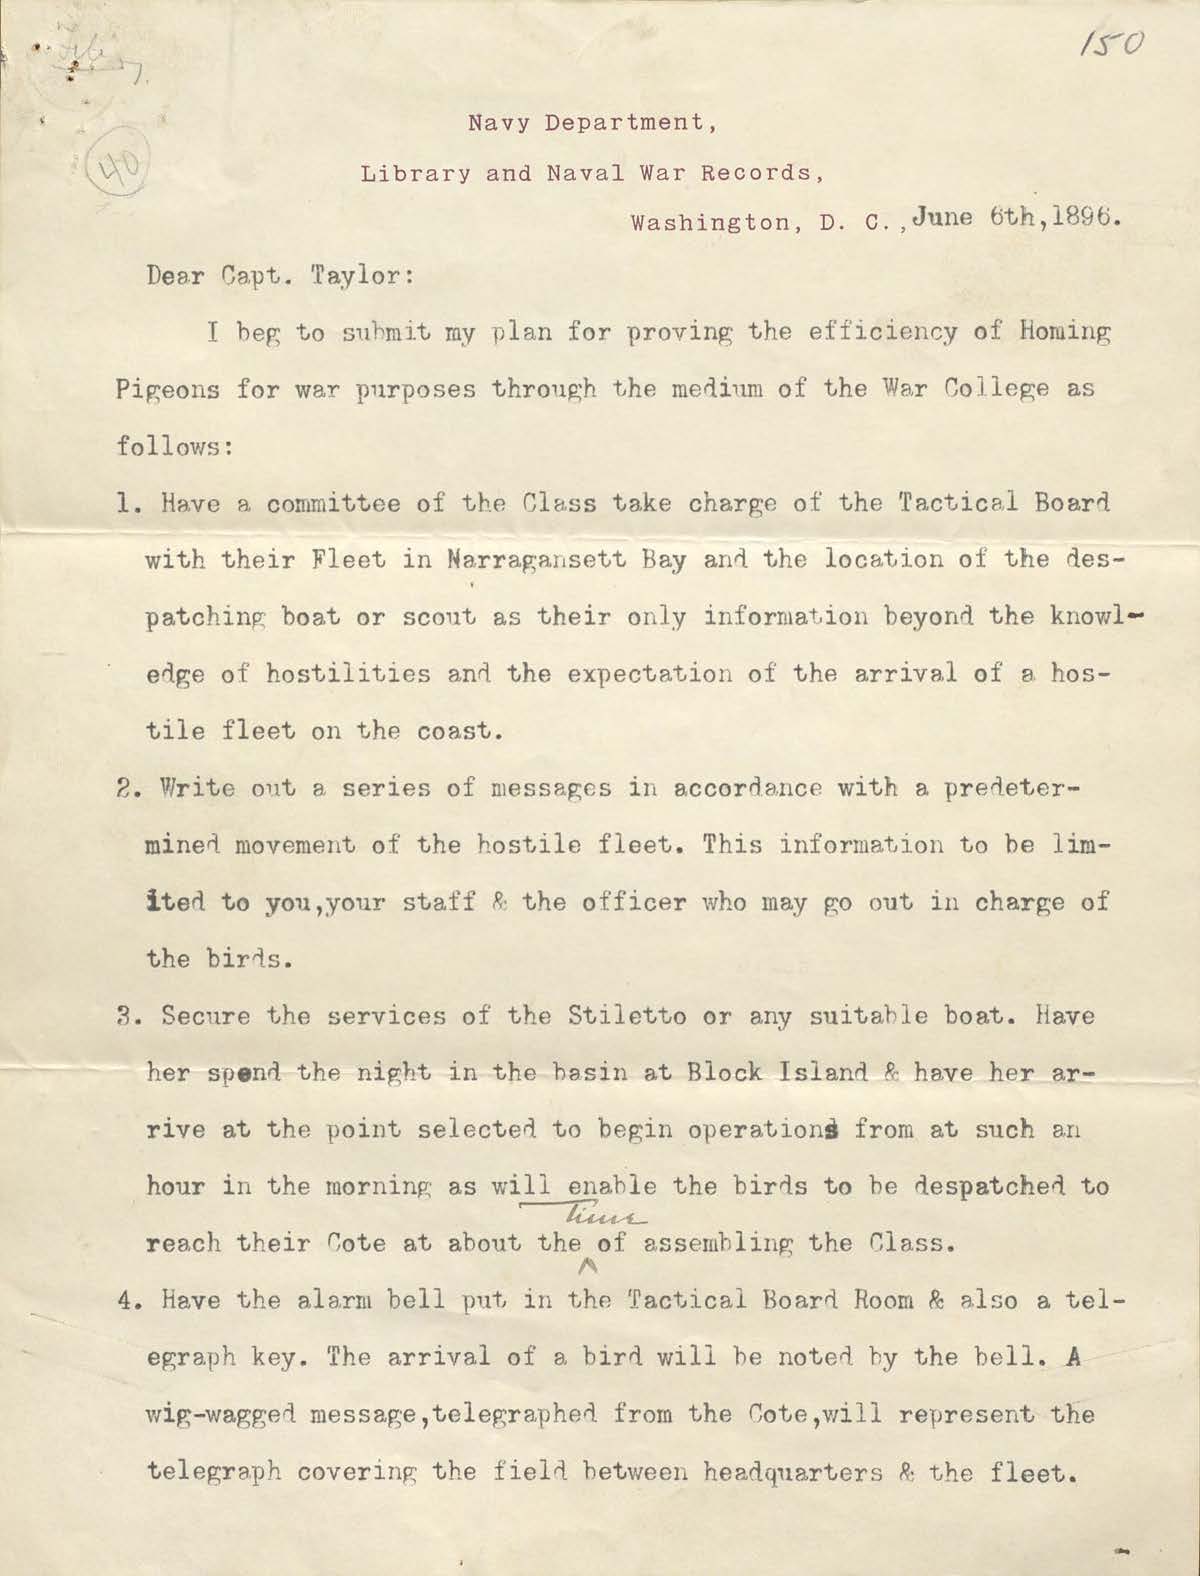 Letter from C. H. Harlow to H.C. Taylor proposing a NWC homing pigeon service